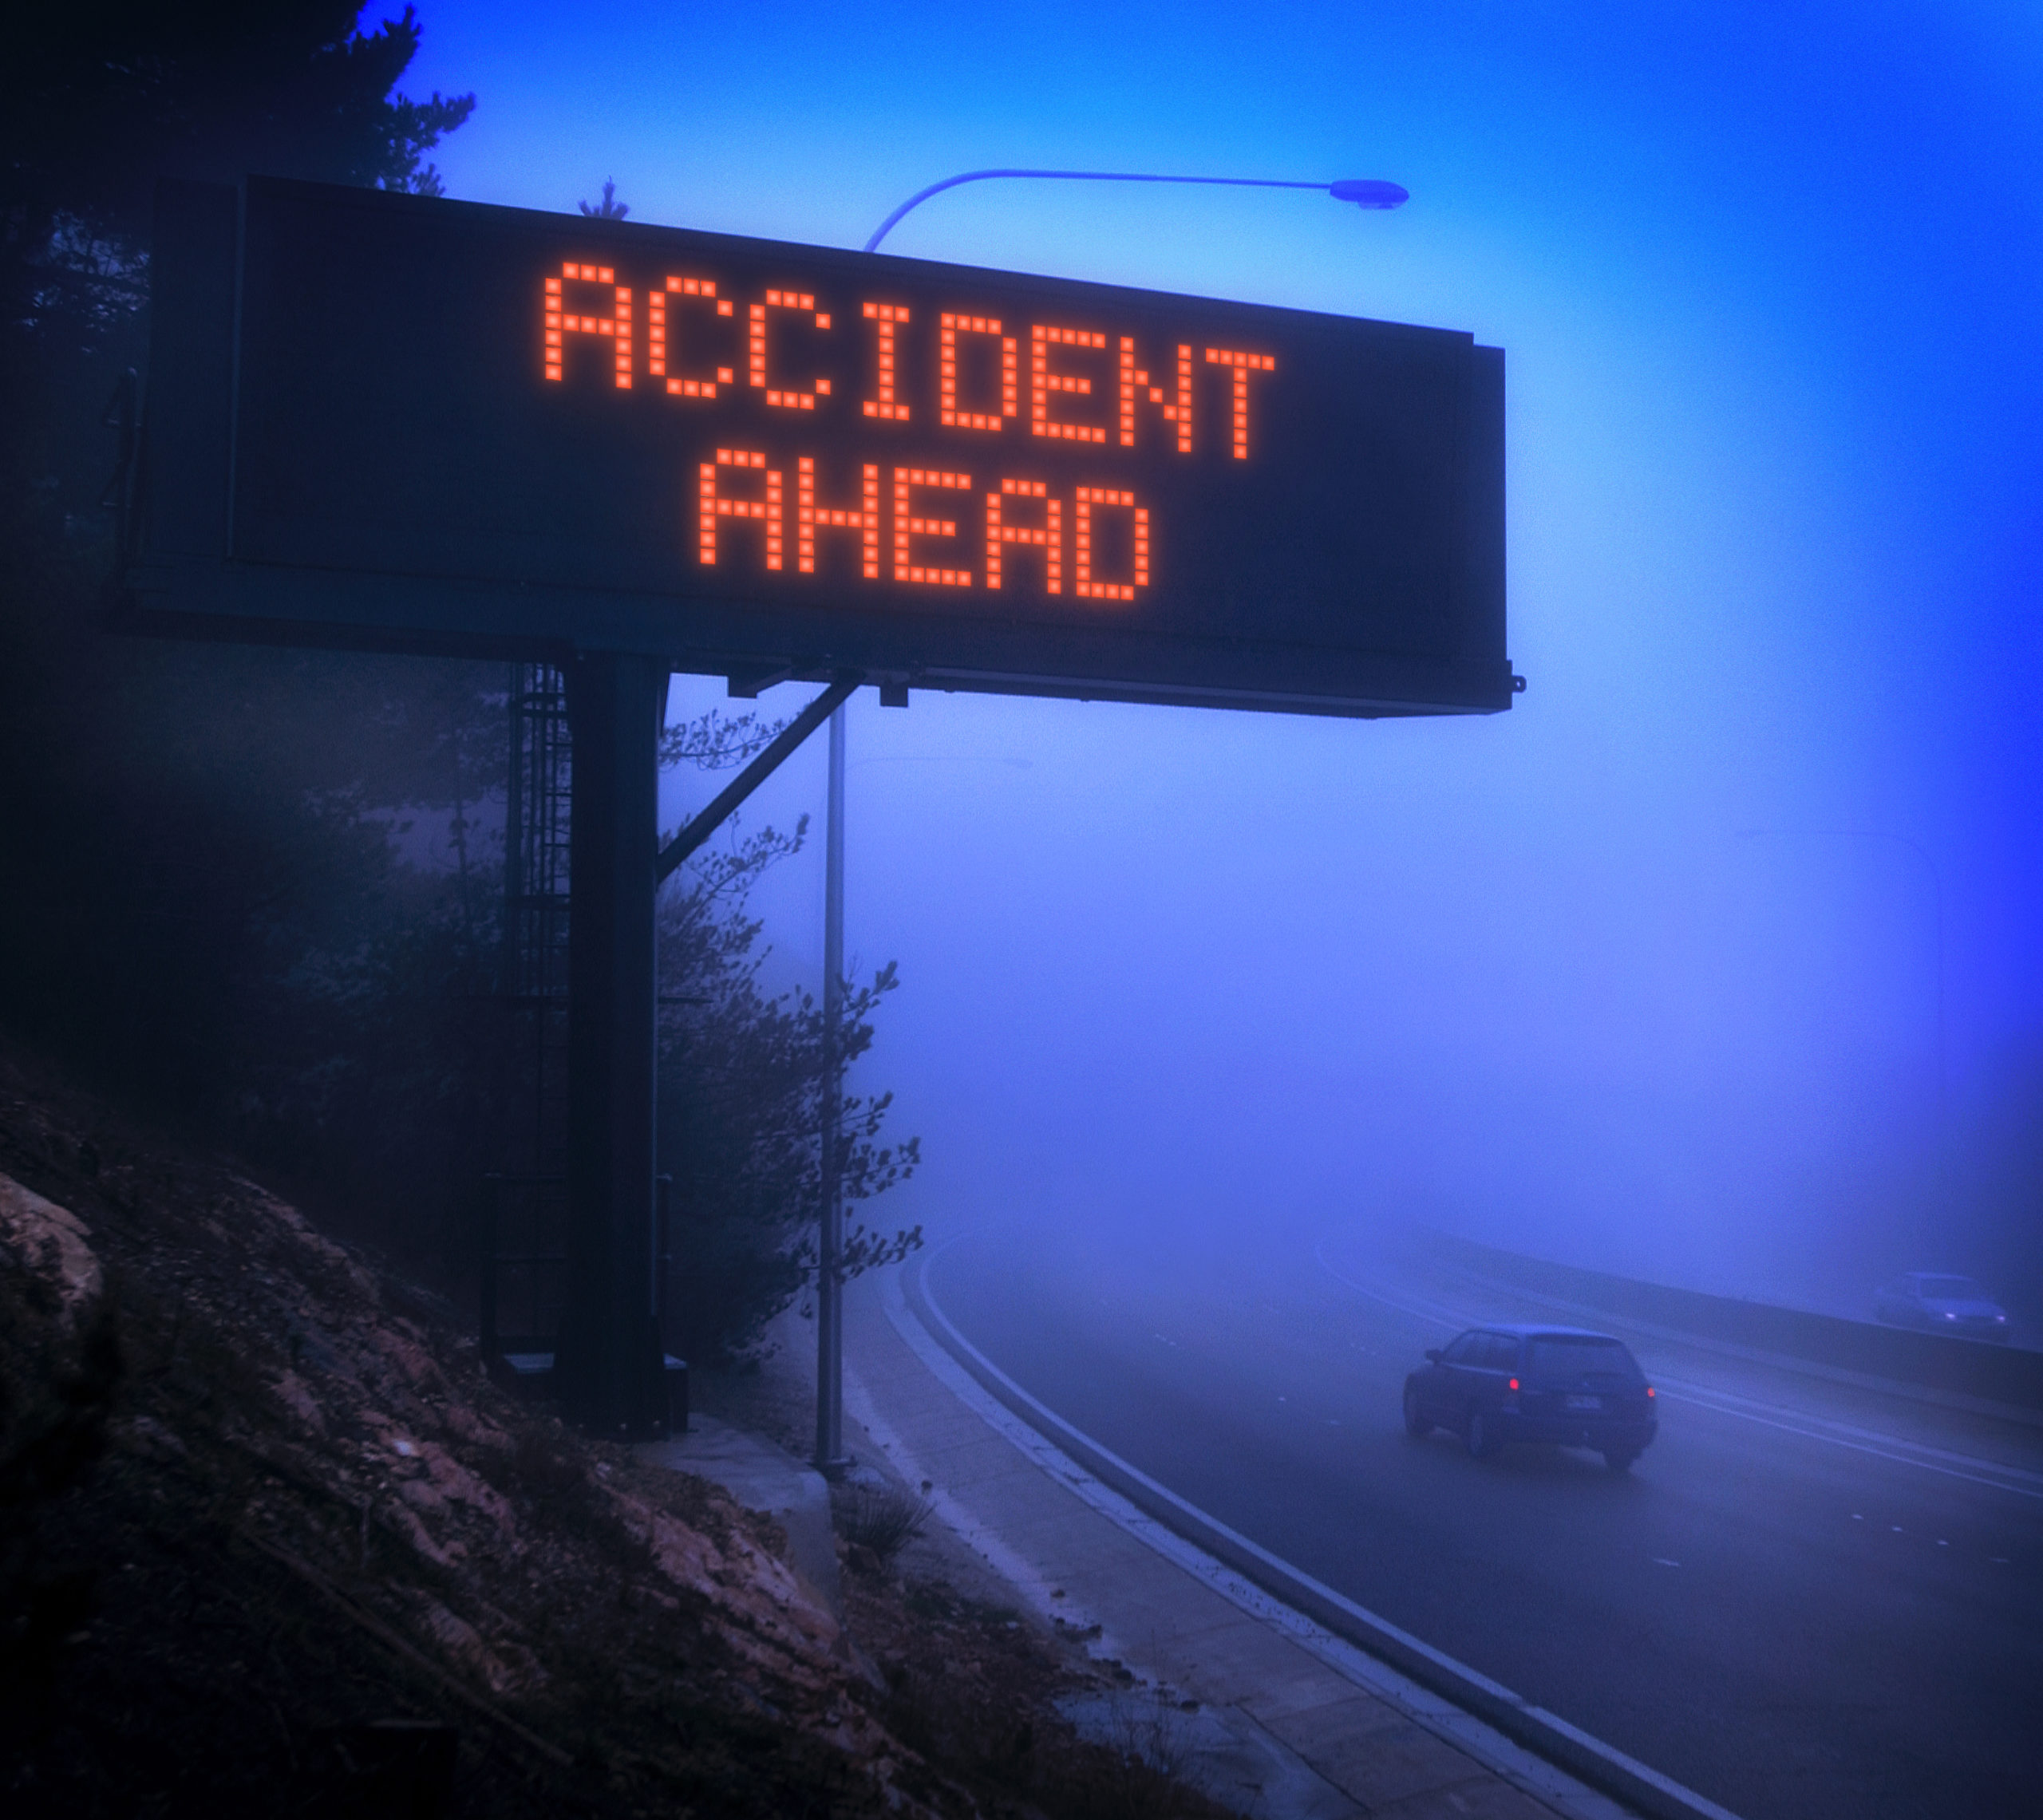 The Most Common Injuries Following a Car Crash - accident road alert system over mountain highway at night